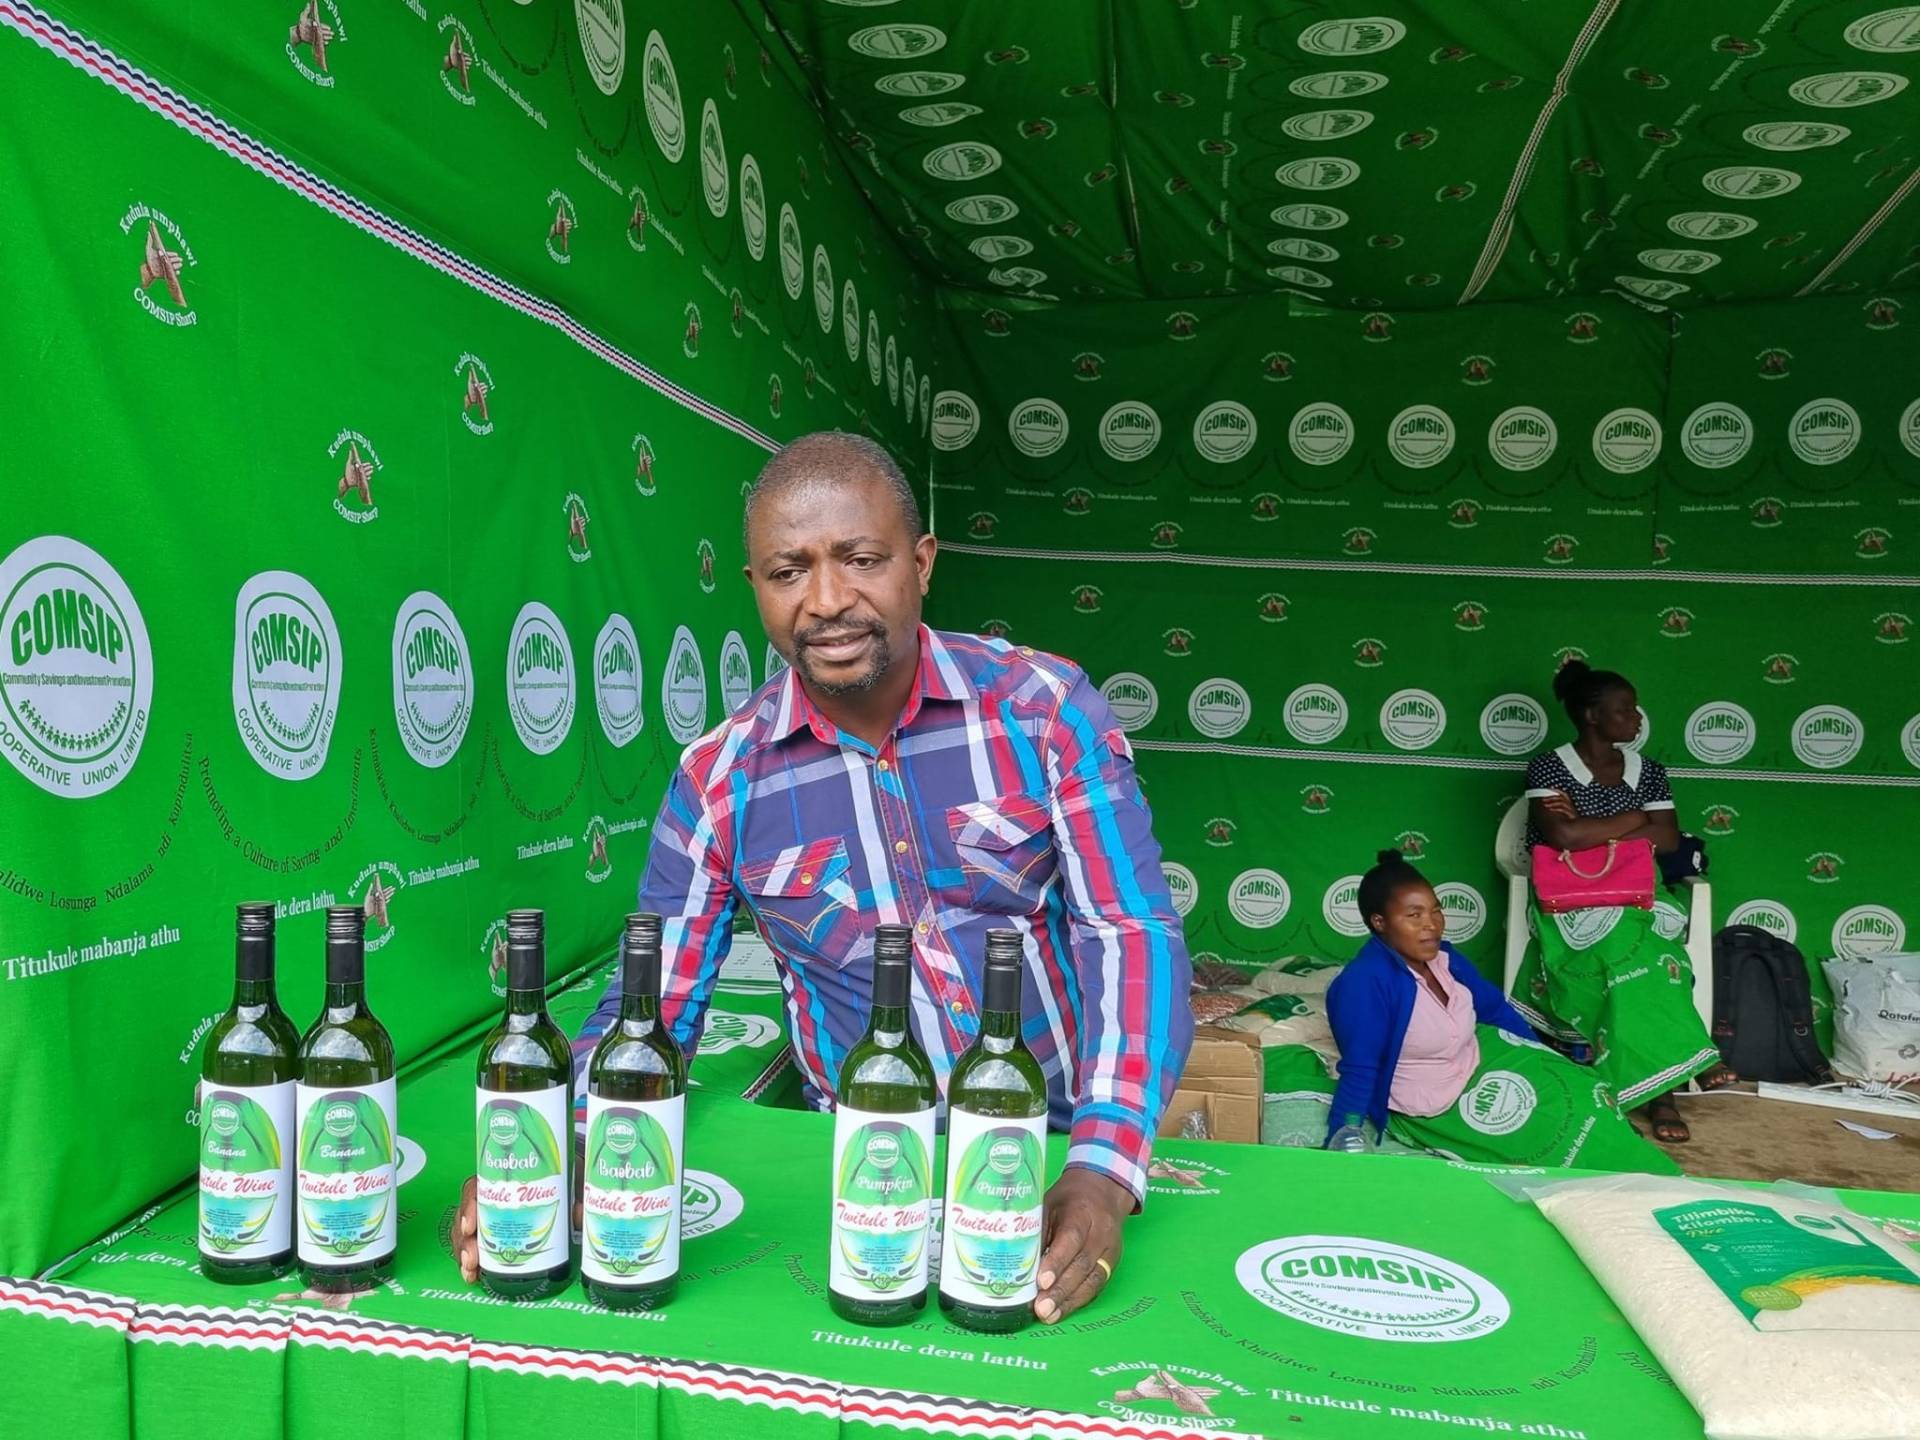 The Malawians braving climate shocks and red tape to make banana wine